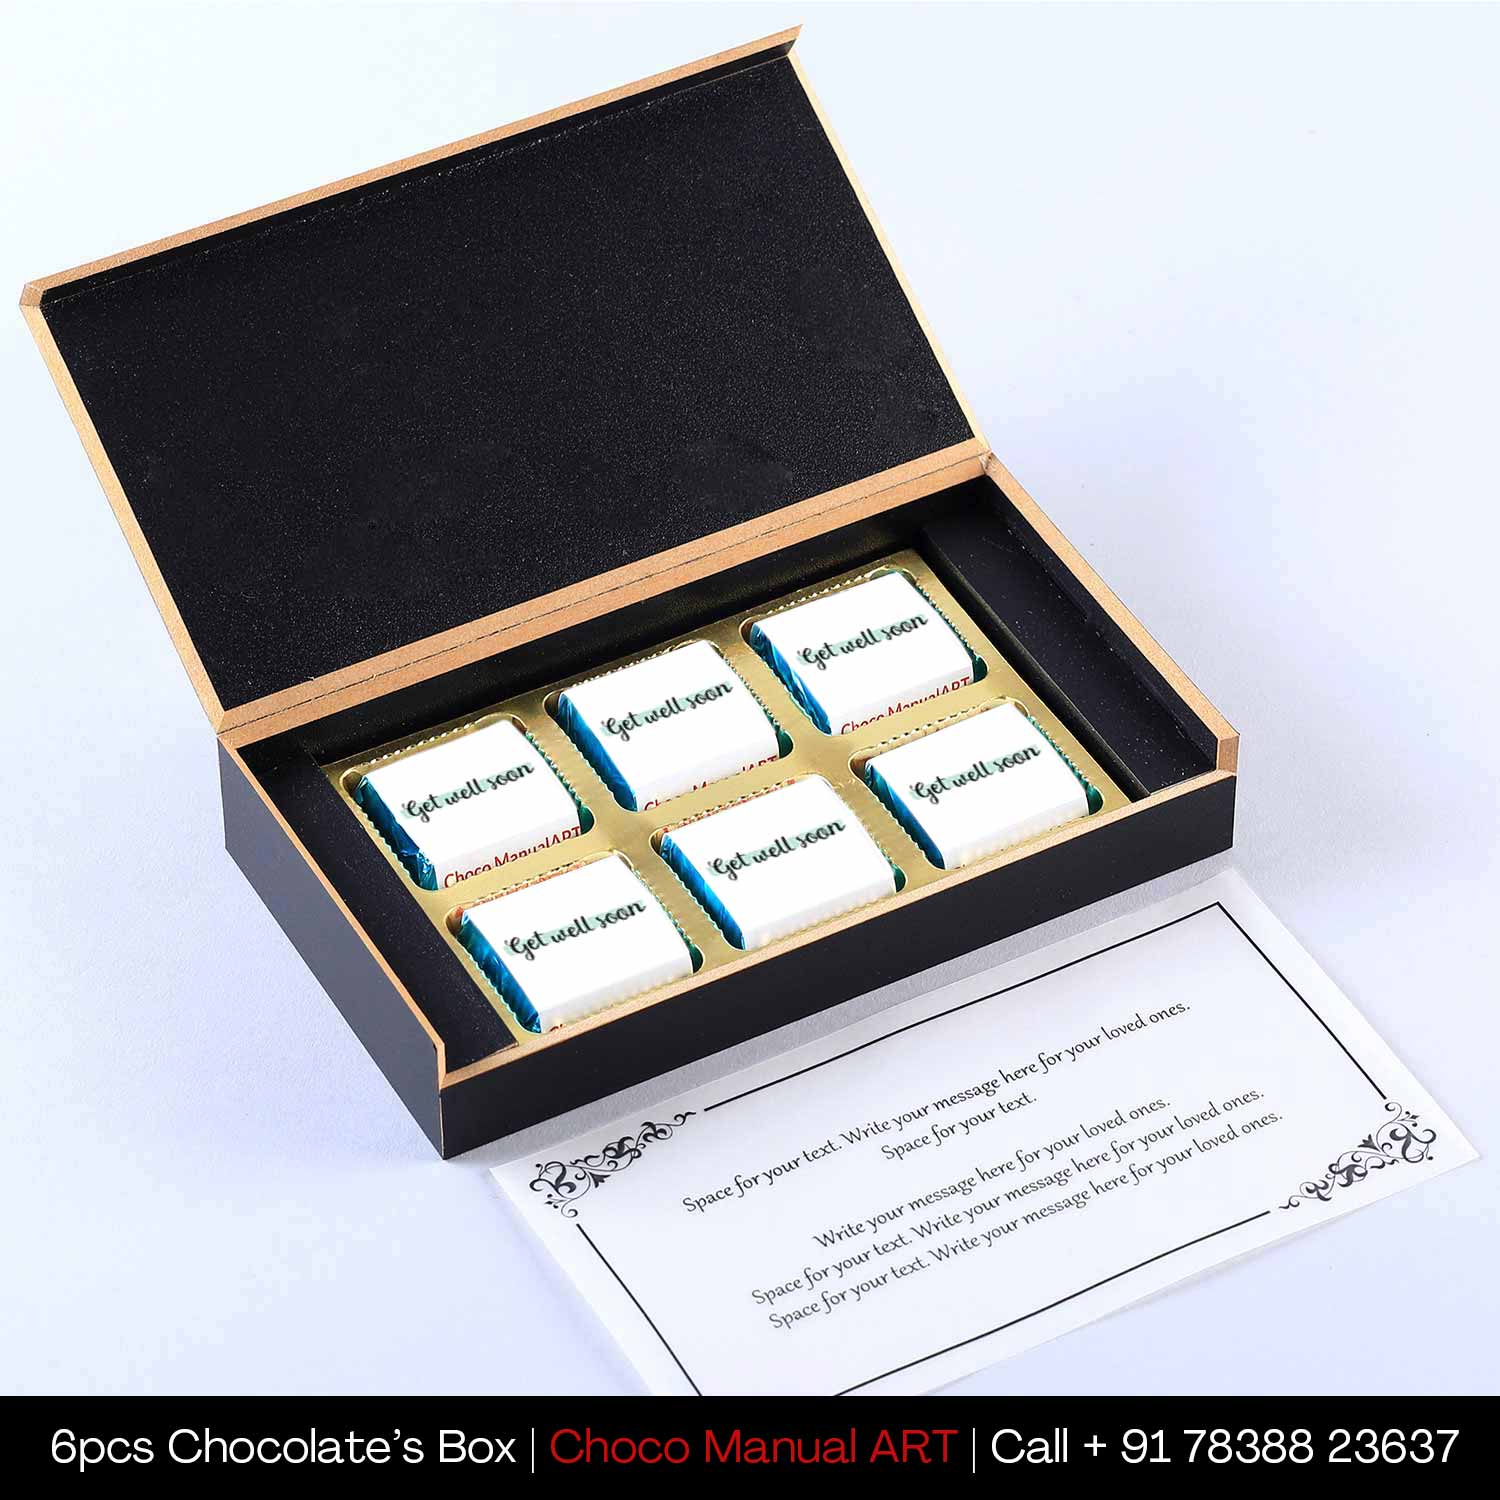 Get Well Soon personalised chocolate wrappers print